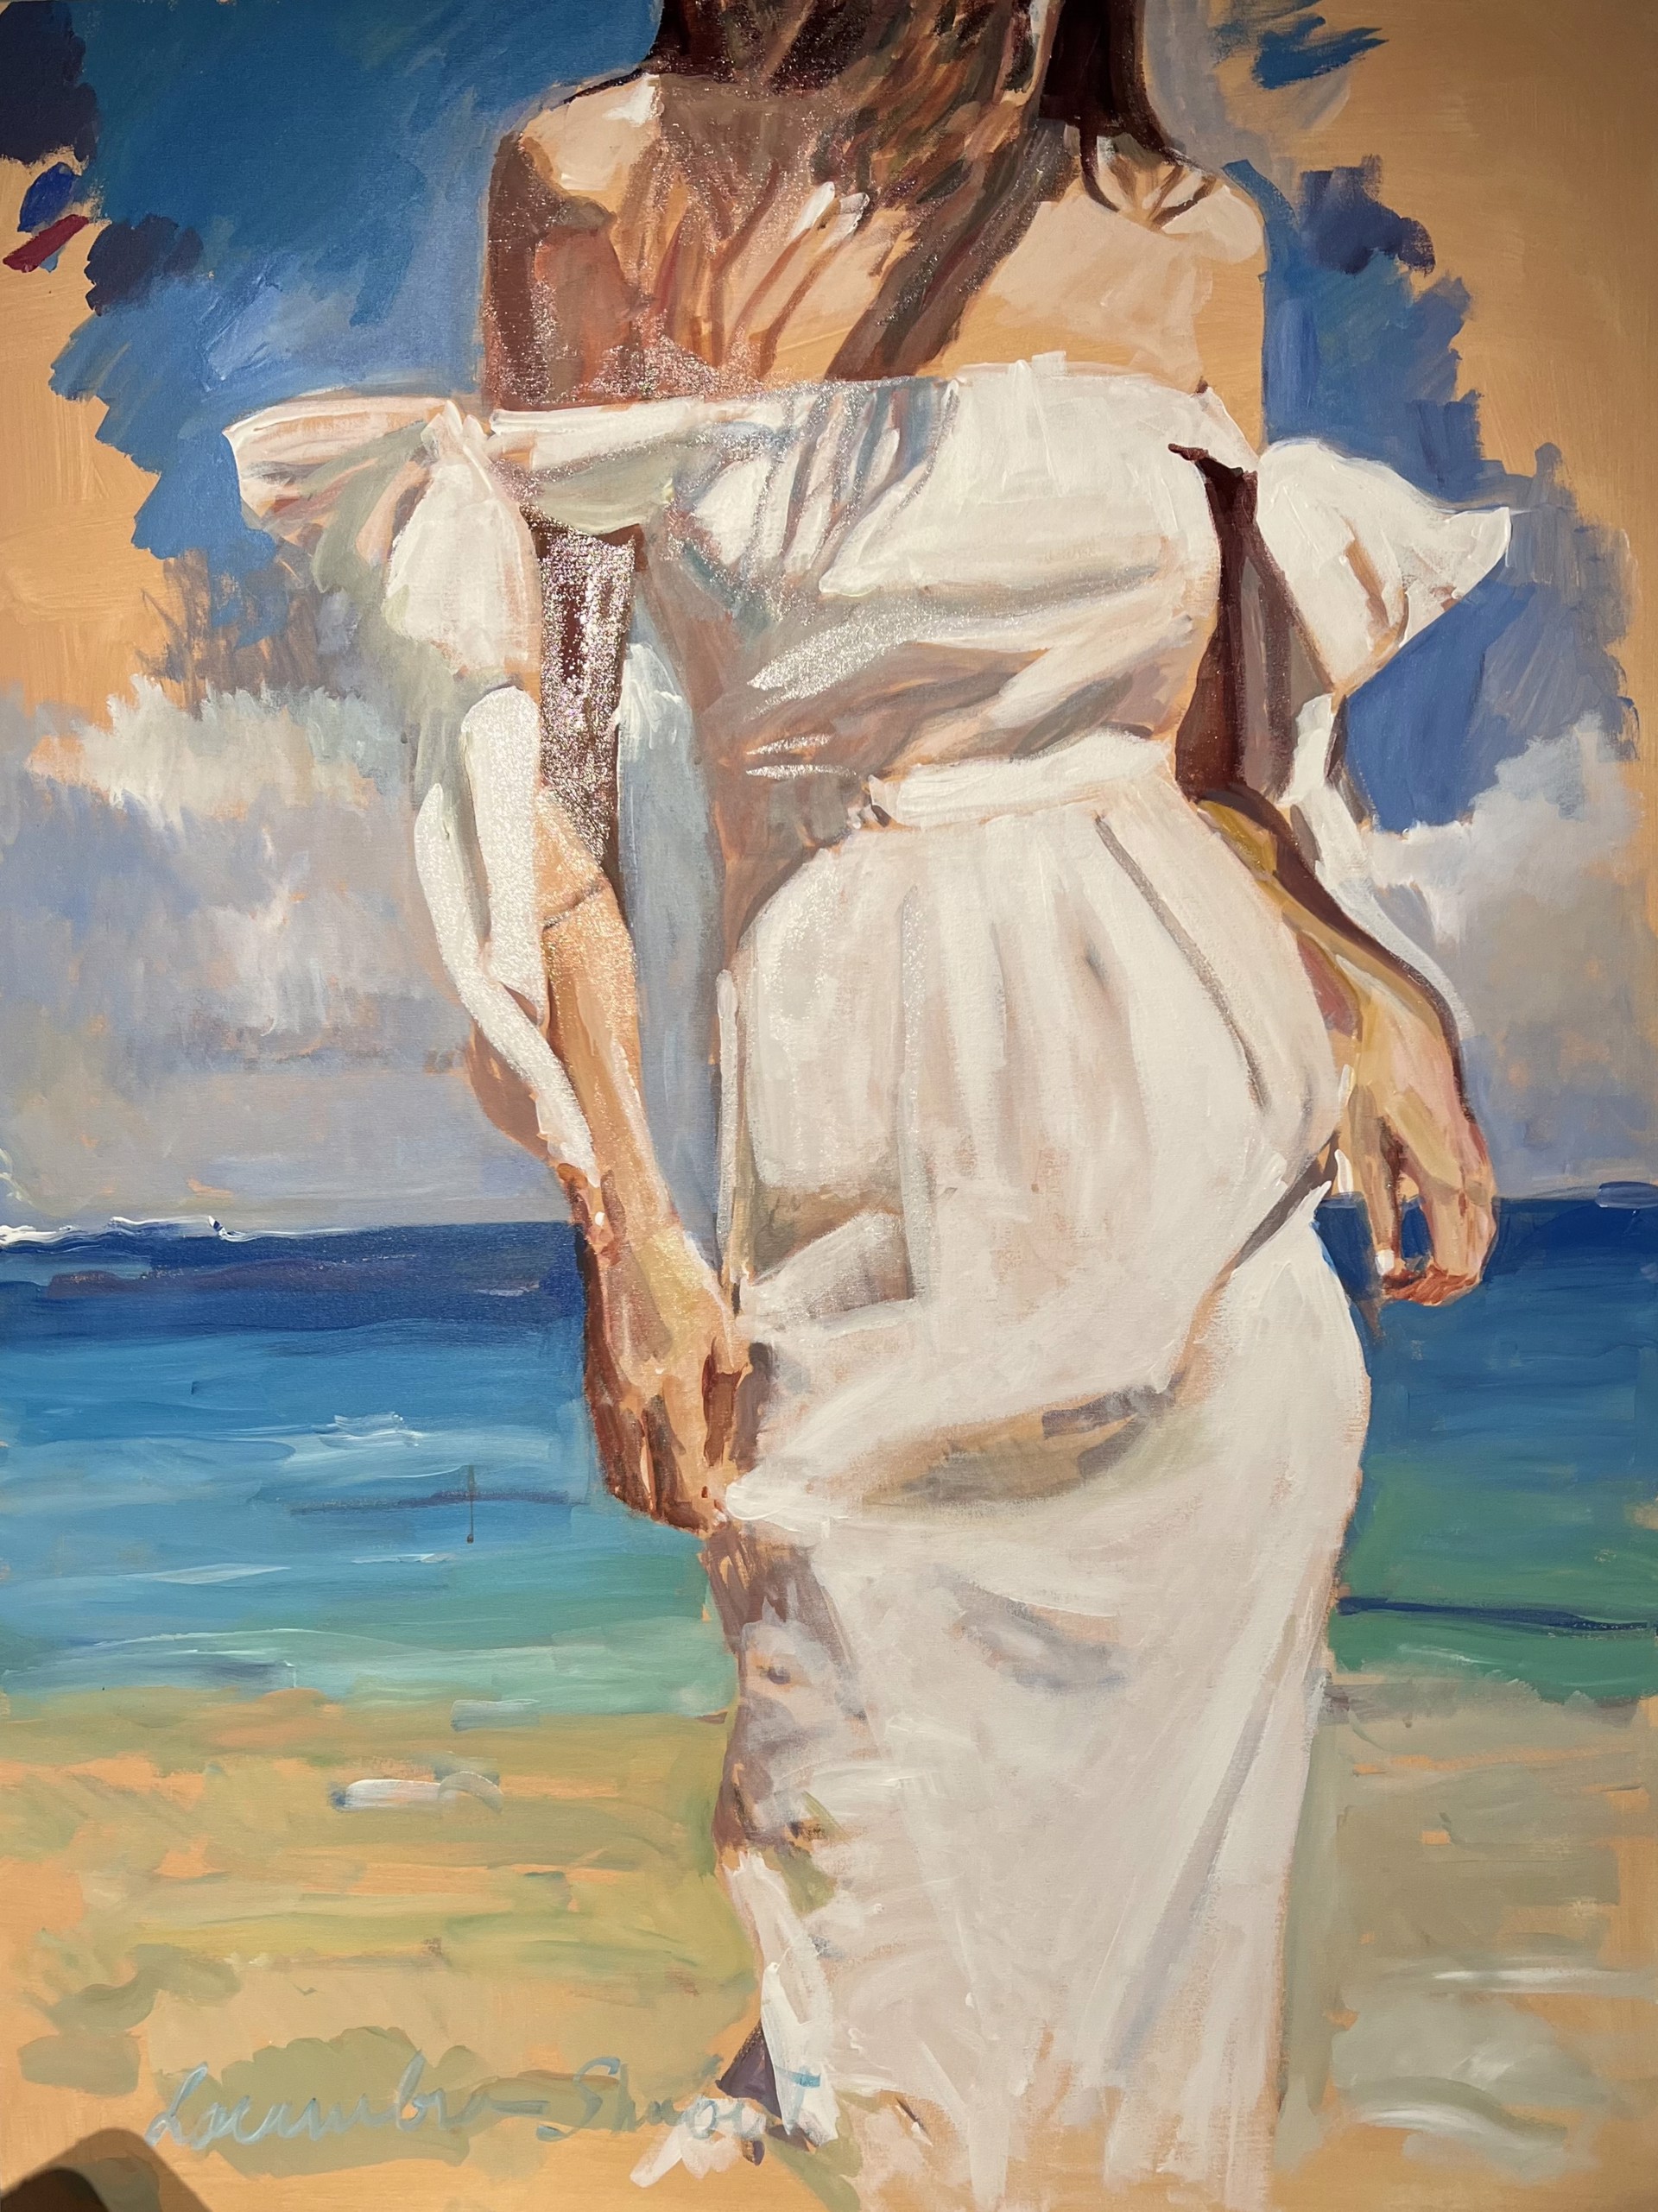 White Dress at the Ocean by Laura Lacambra Shubert